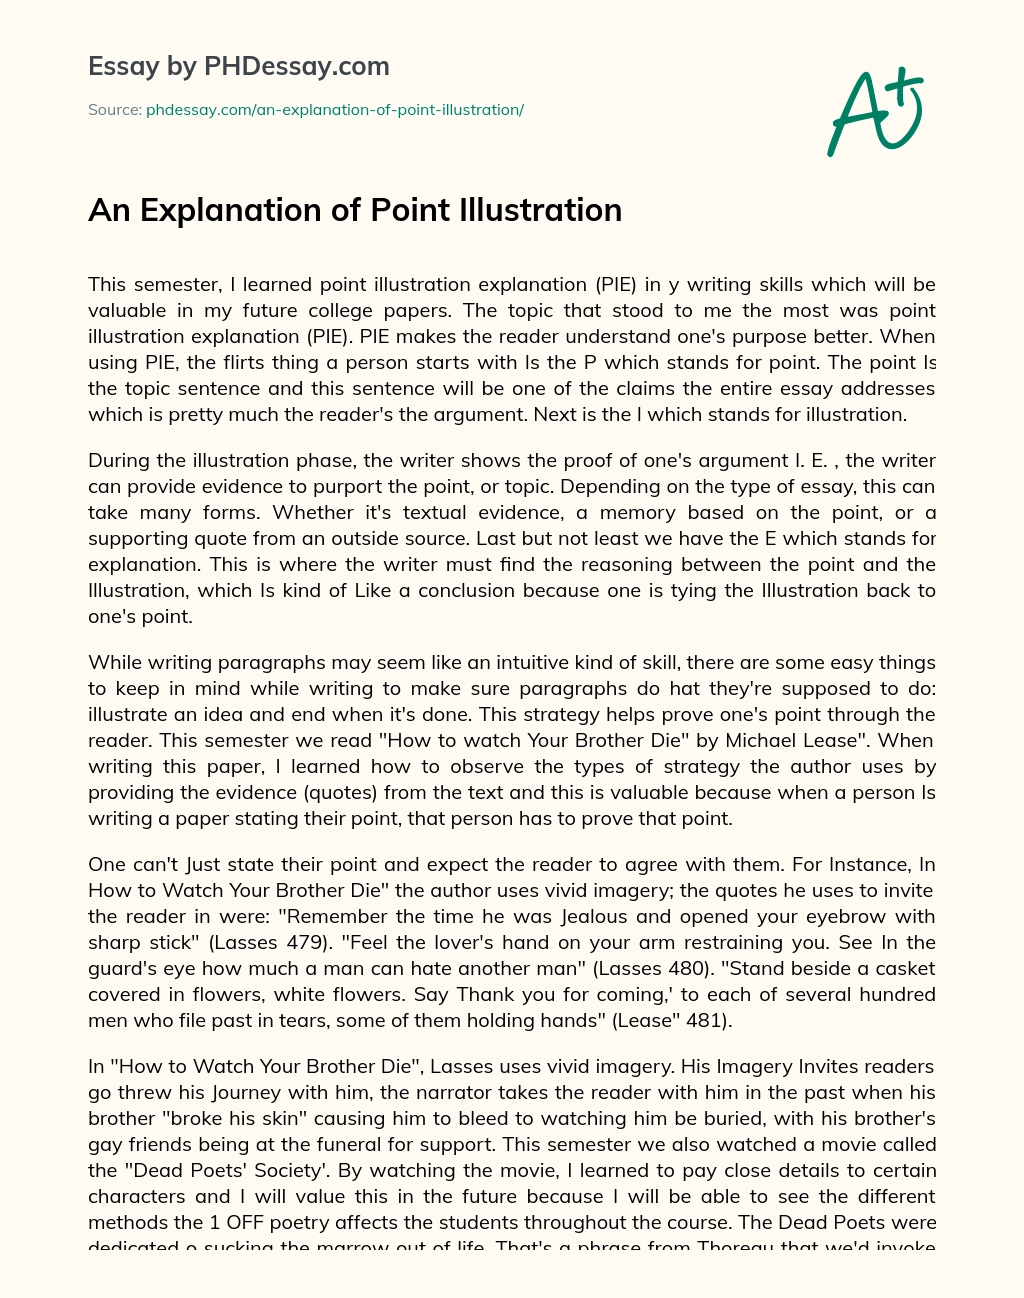 An Explanation of Point Illustration essay